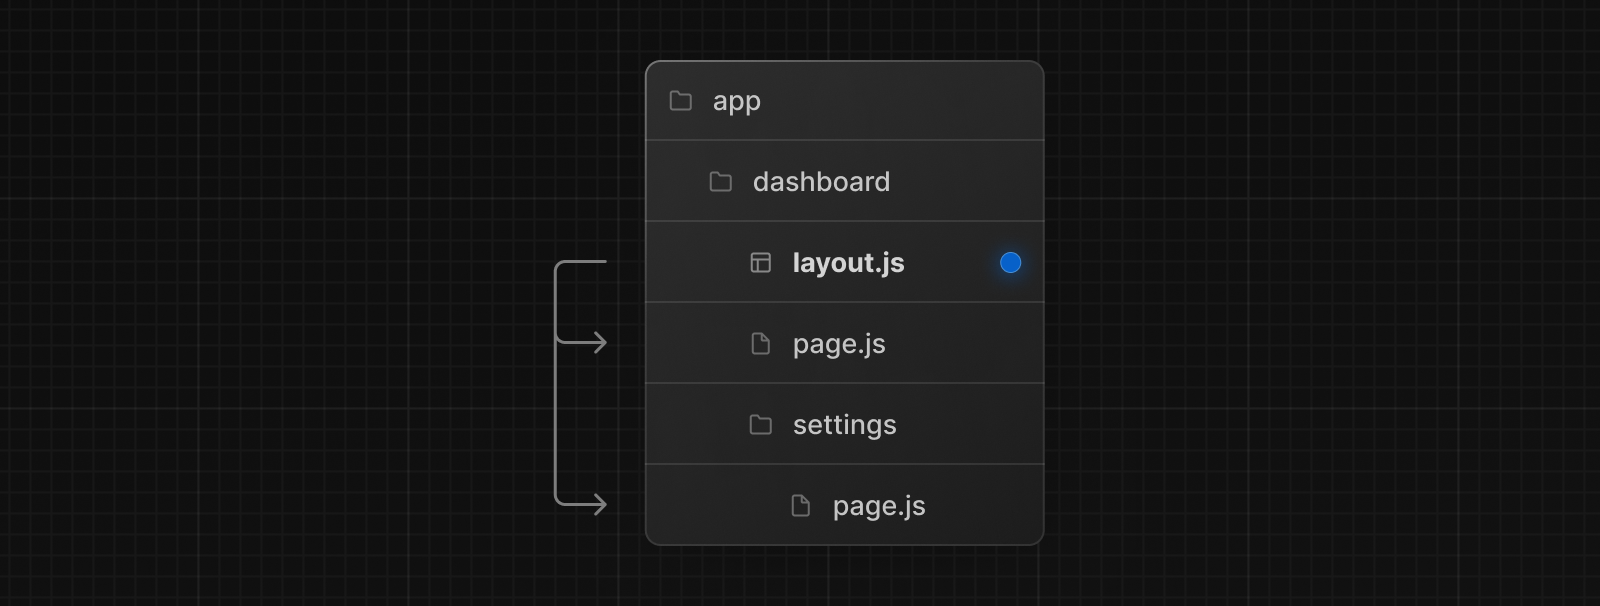 layout.js special file